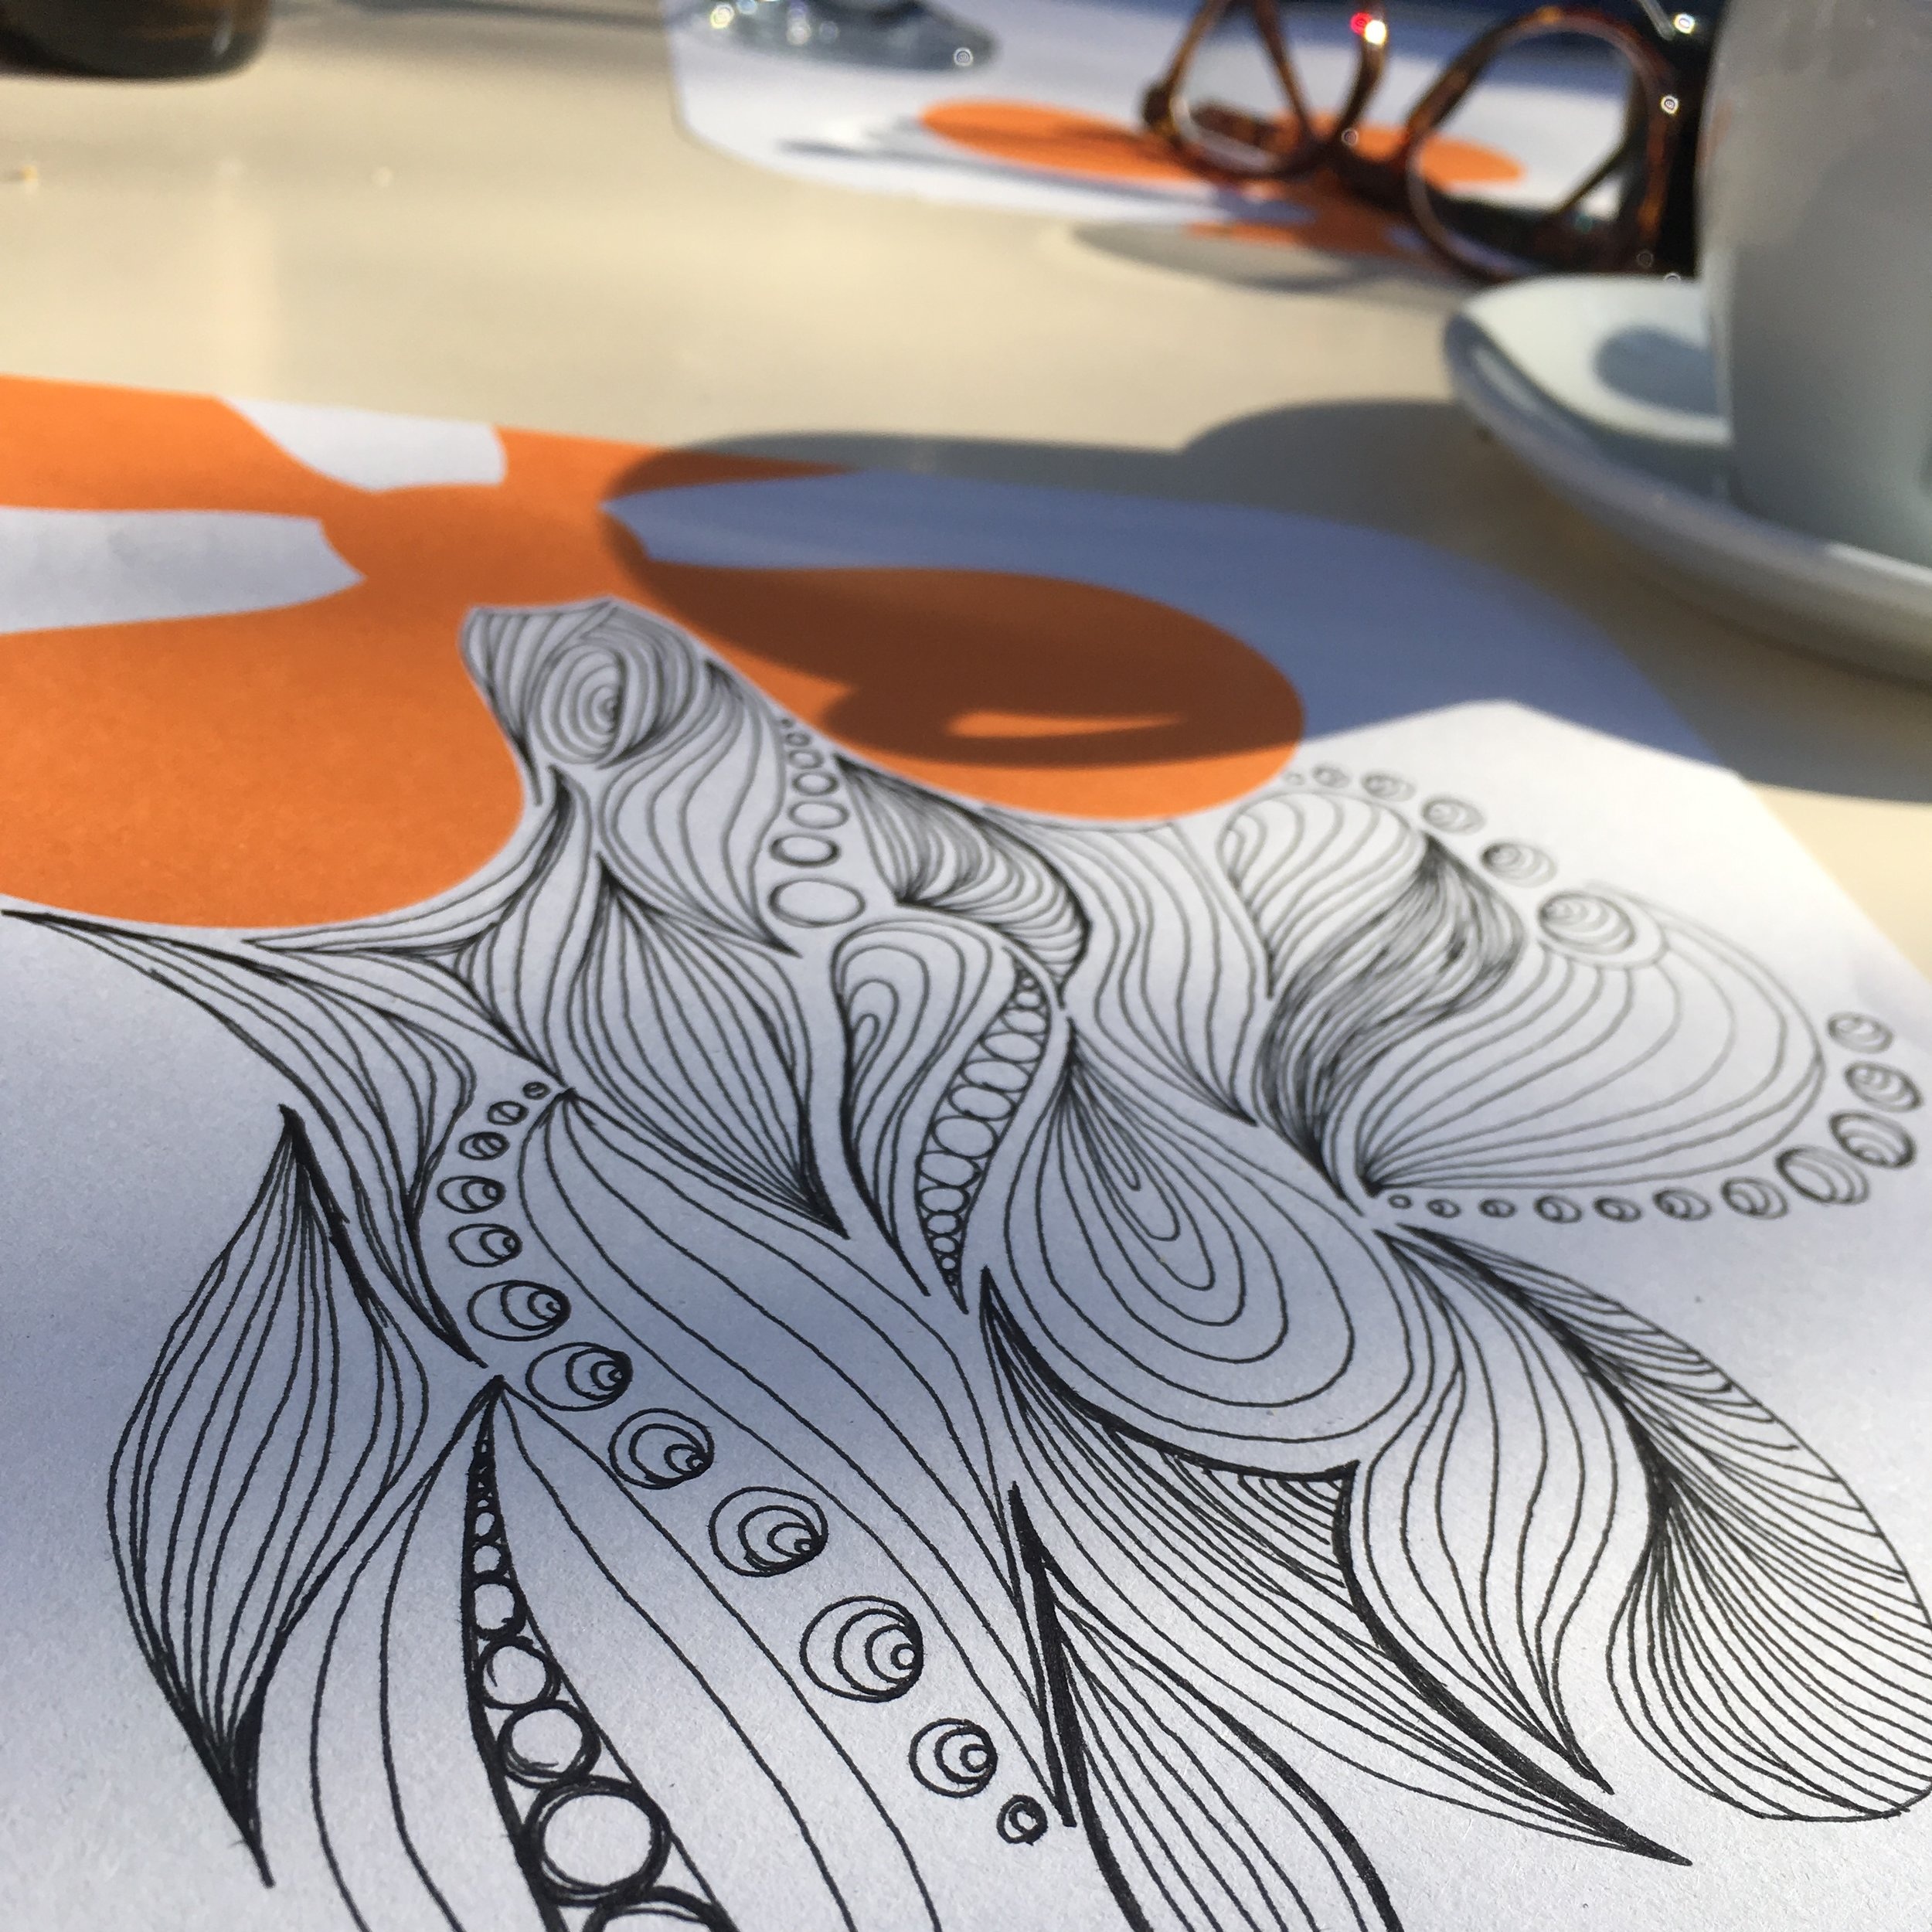 It may seem silly, but making time to have coffees and doodle makes me happy.